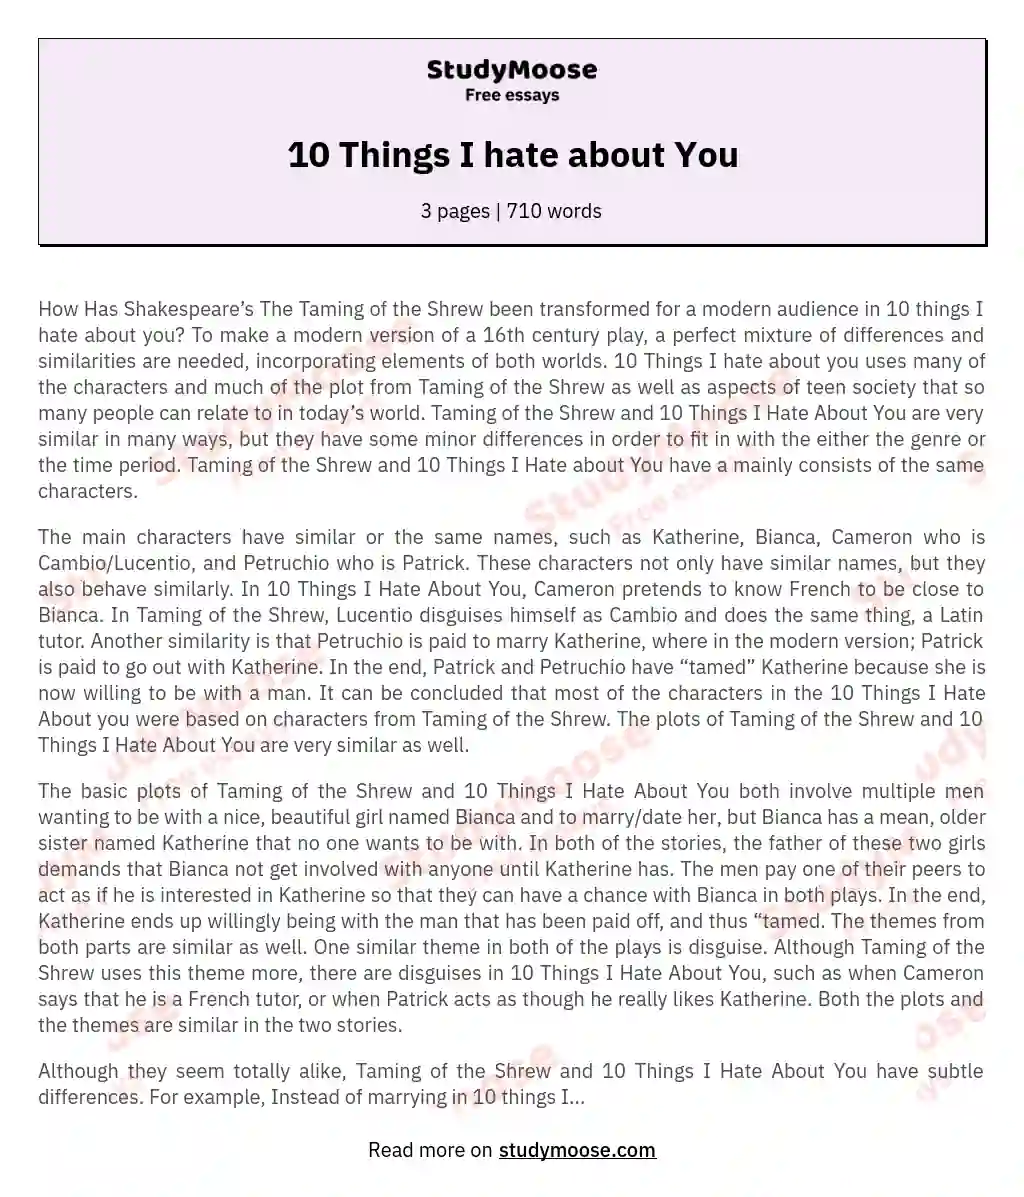 10 Things I hate about You